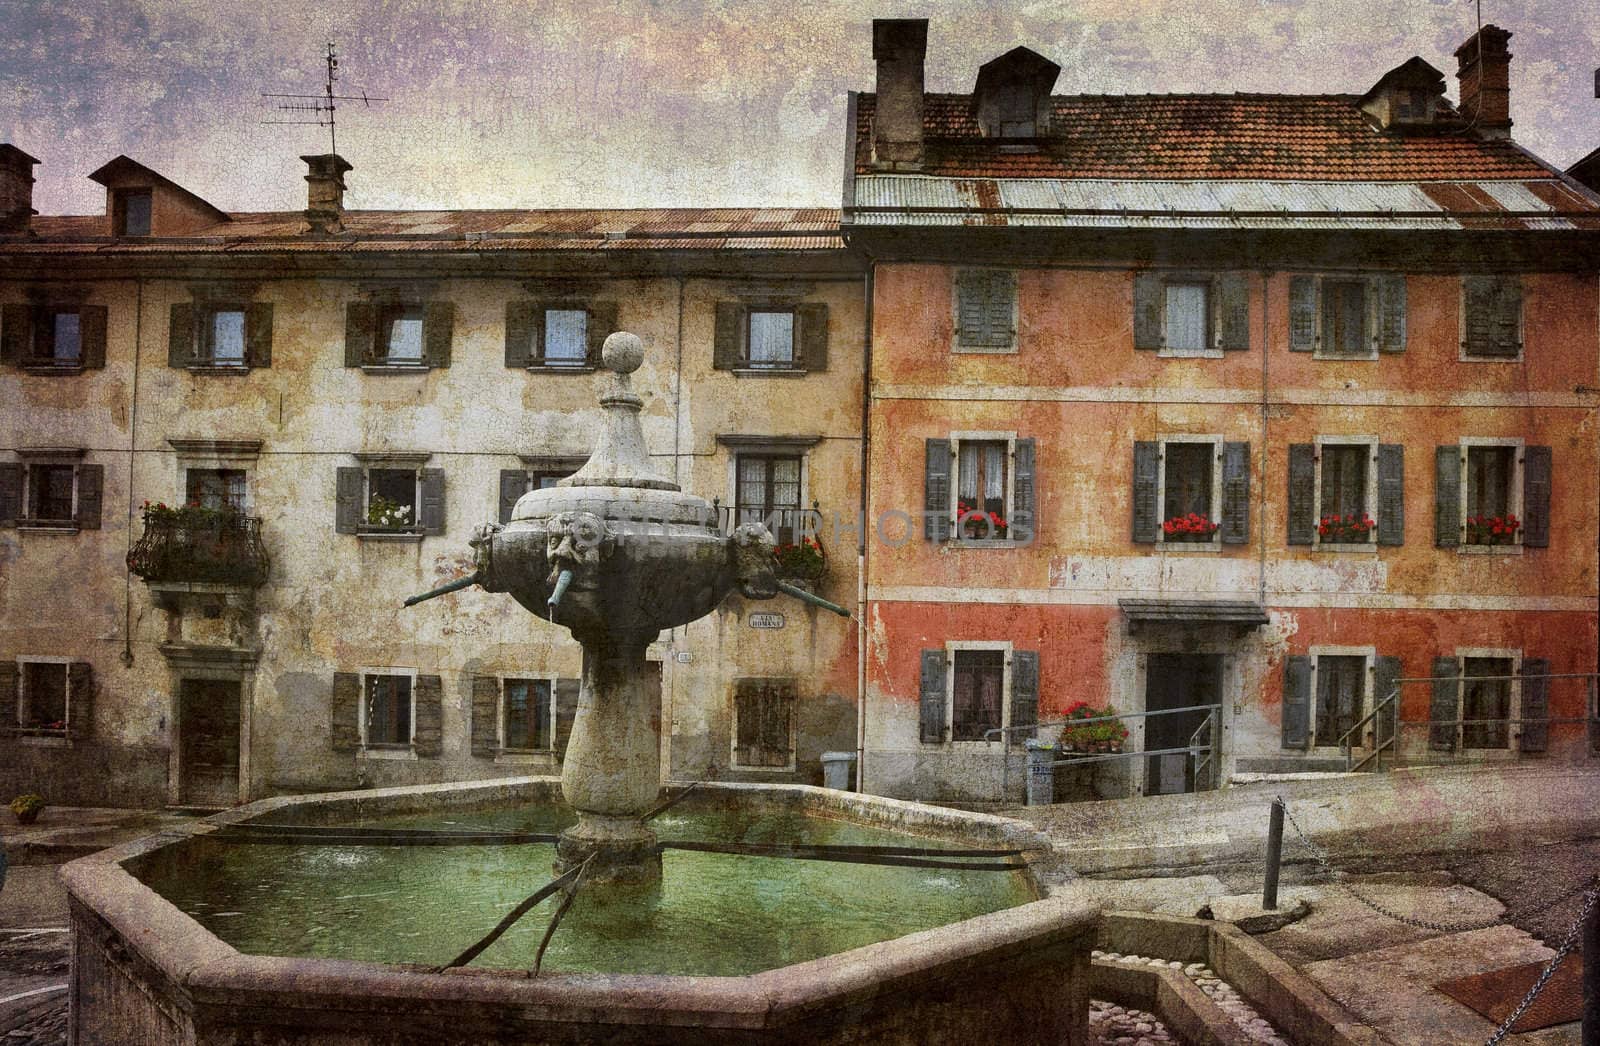 Beautiful Italian village square in decay. More of my images worked together to reflect time and age.